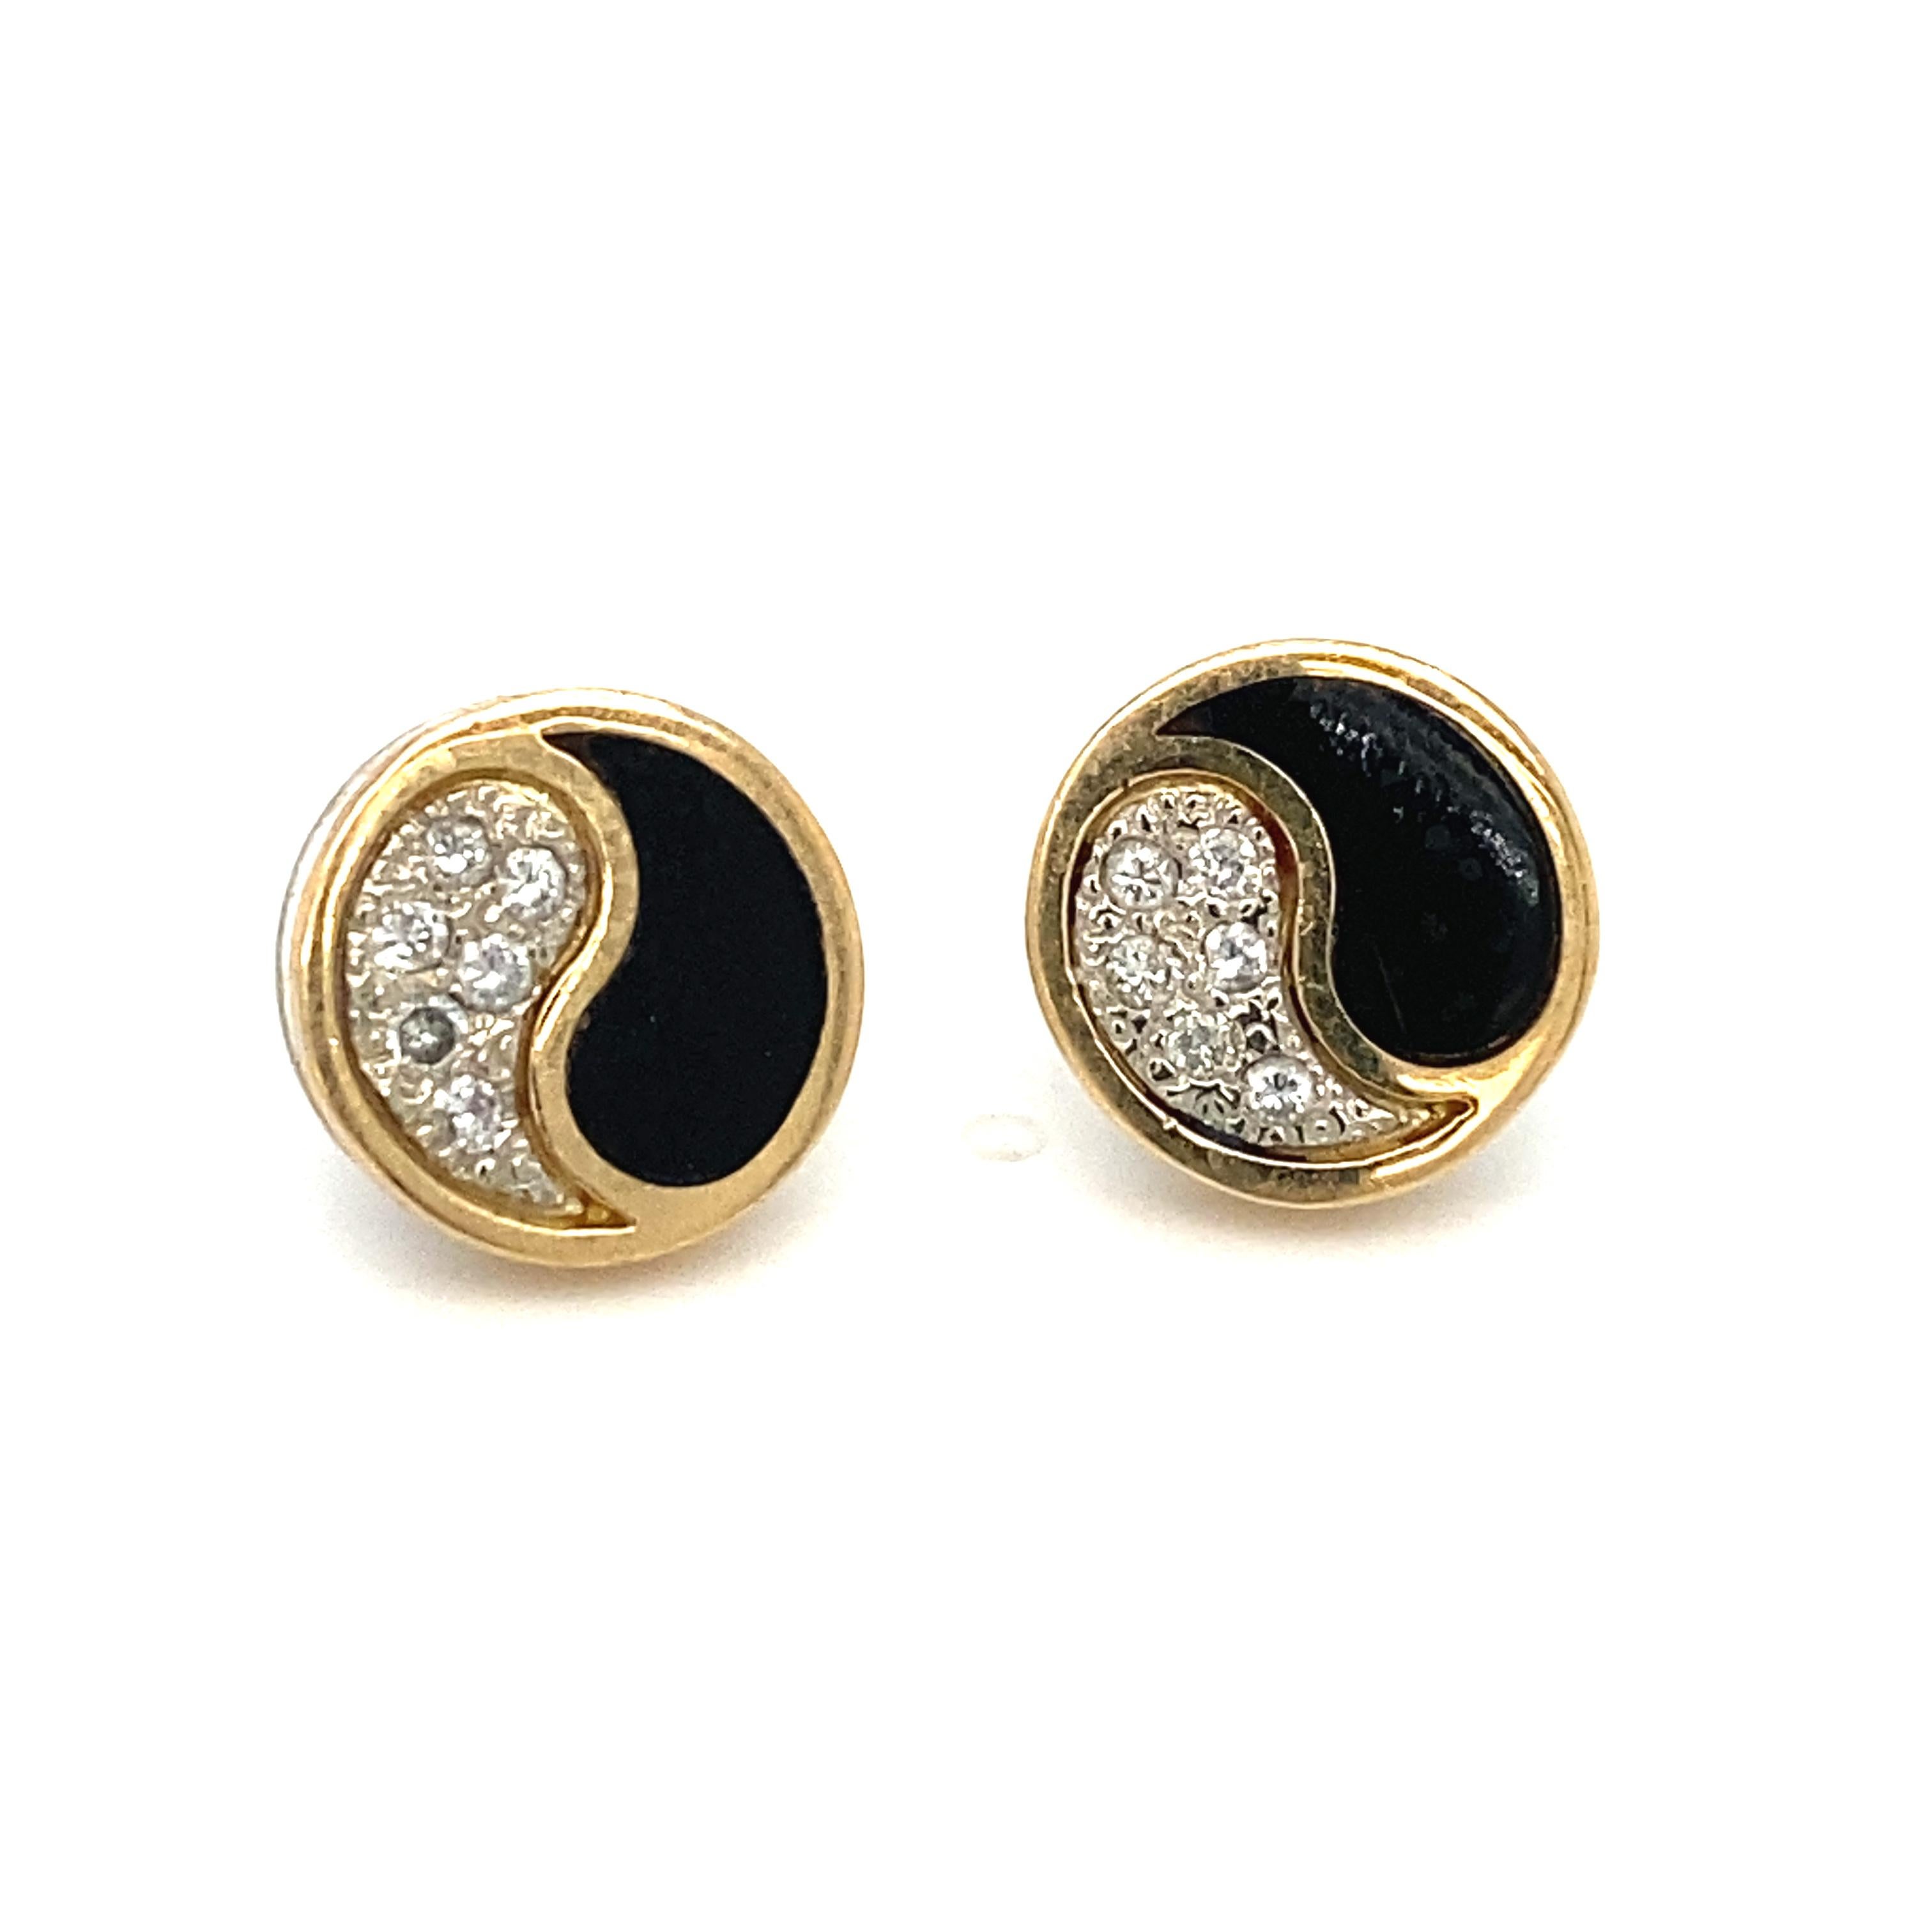 Item Details: These stud earrings have black coral and diamonds in a yin-yang design. Made in Hawaii.

Circa: 2000s
Metal Type: 14 Karat Yellow Gold
Weight: 5.3 GRAMS
Size: 0.5 inch Depth 

Diamond Details:

Carat: 0.25 Carat Total Weight 
Shape: